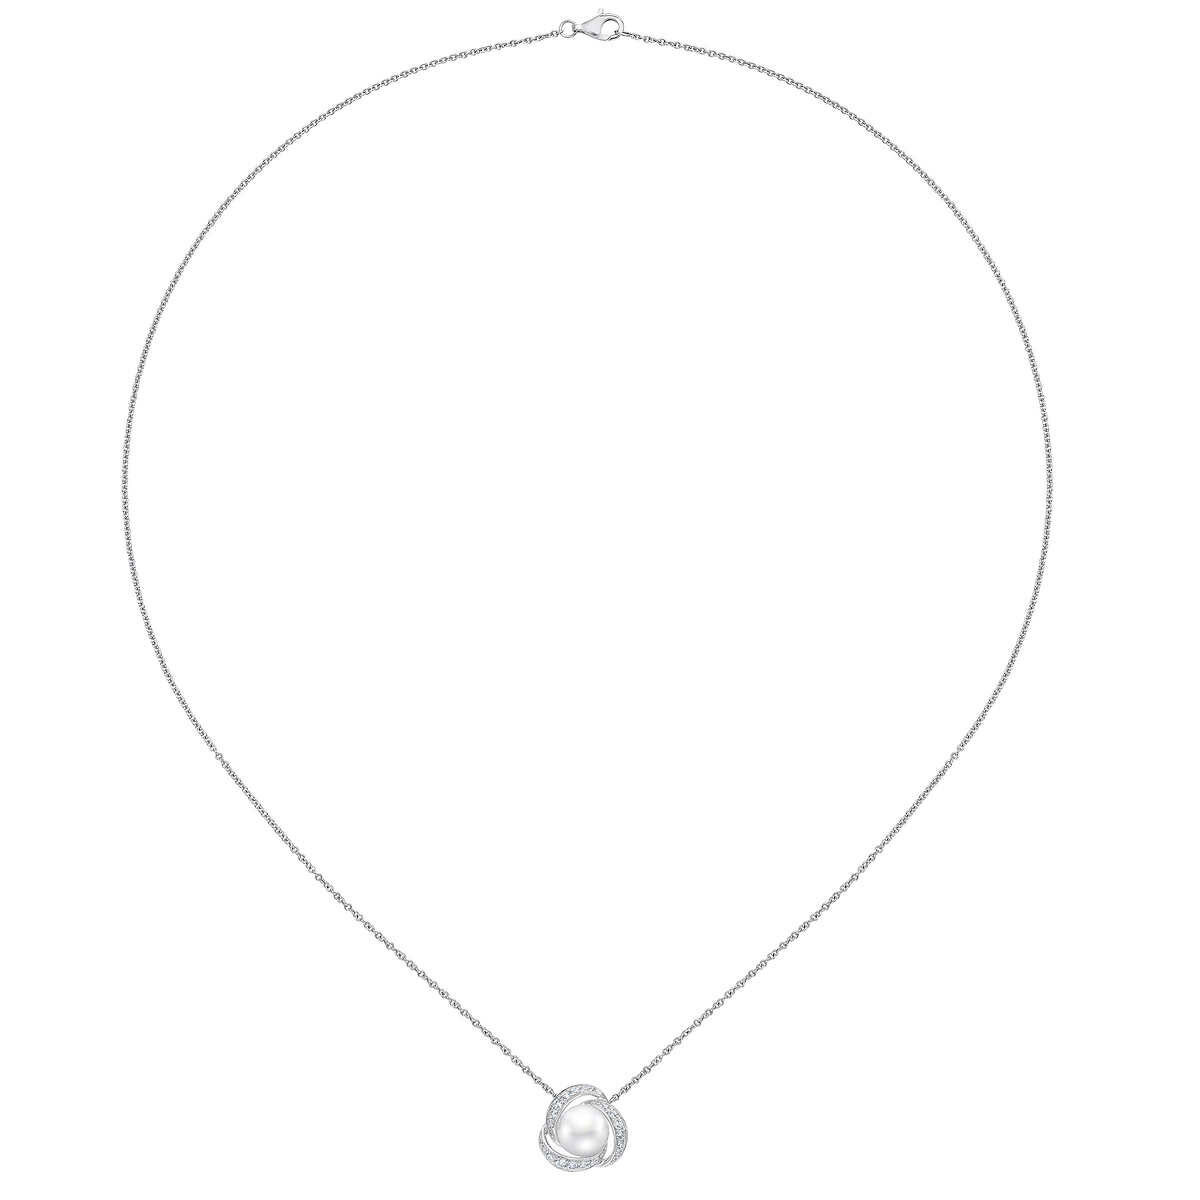 7.5-8mm Cultured Freshwater White Pearl & 0.25ctw Diamond Necklace, 14ct White Gold